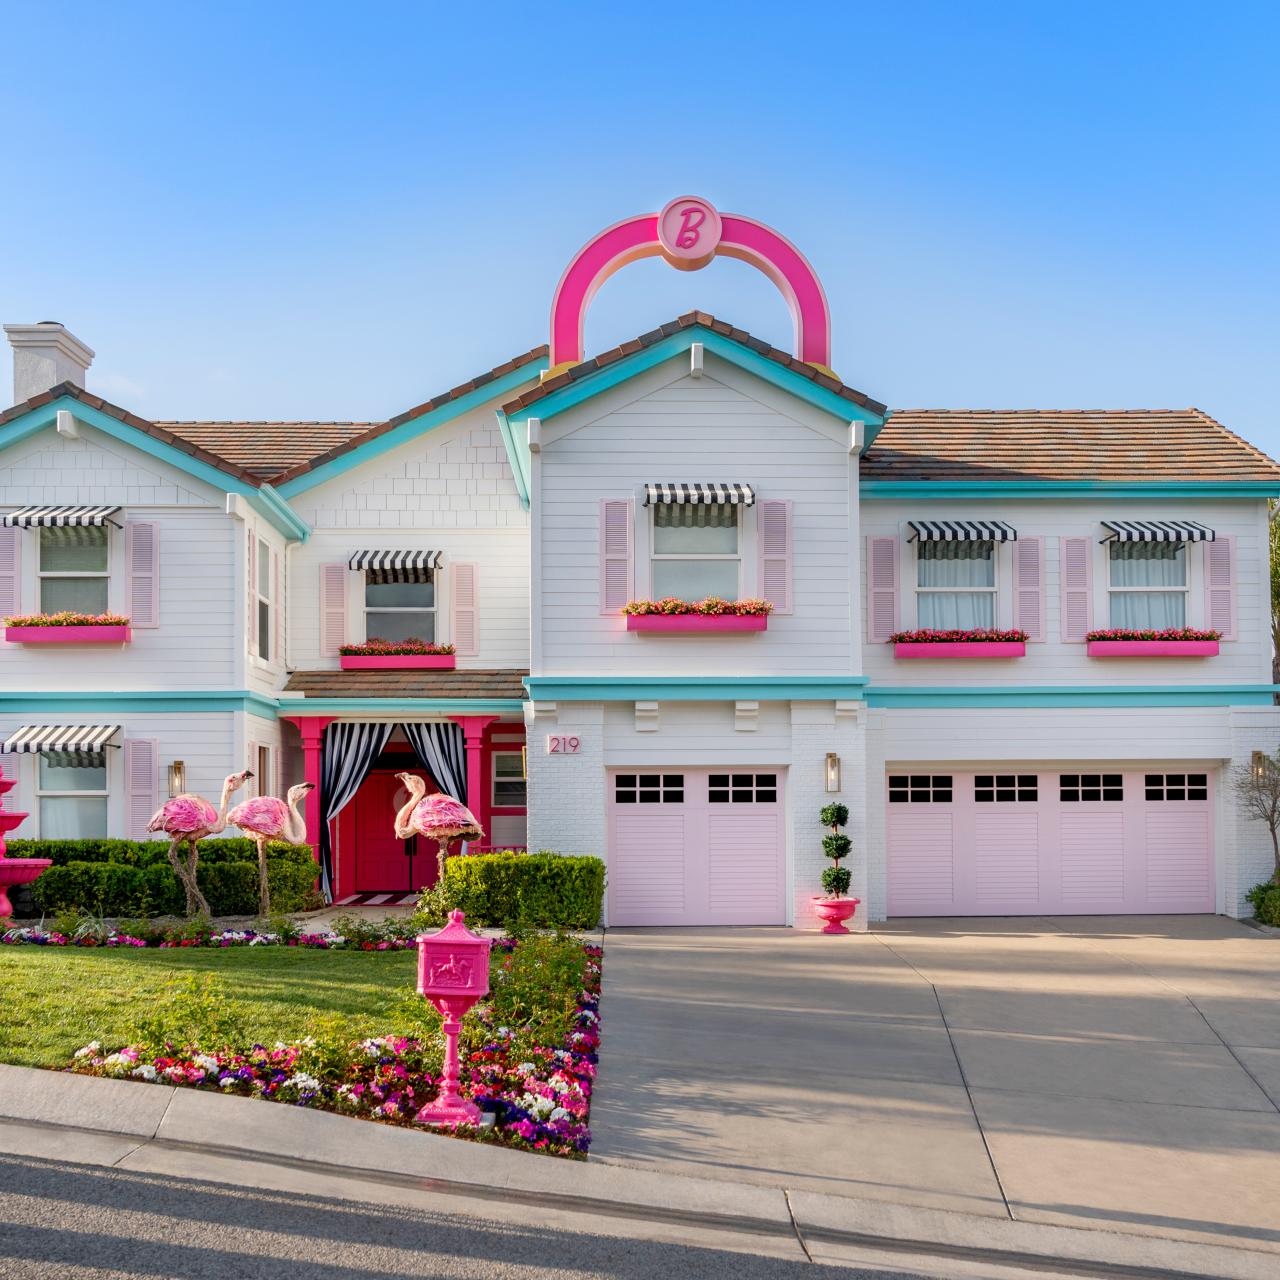 Barbie's Dreamhouse gets a makeover for 2023 - Good Morning America